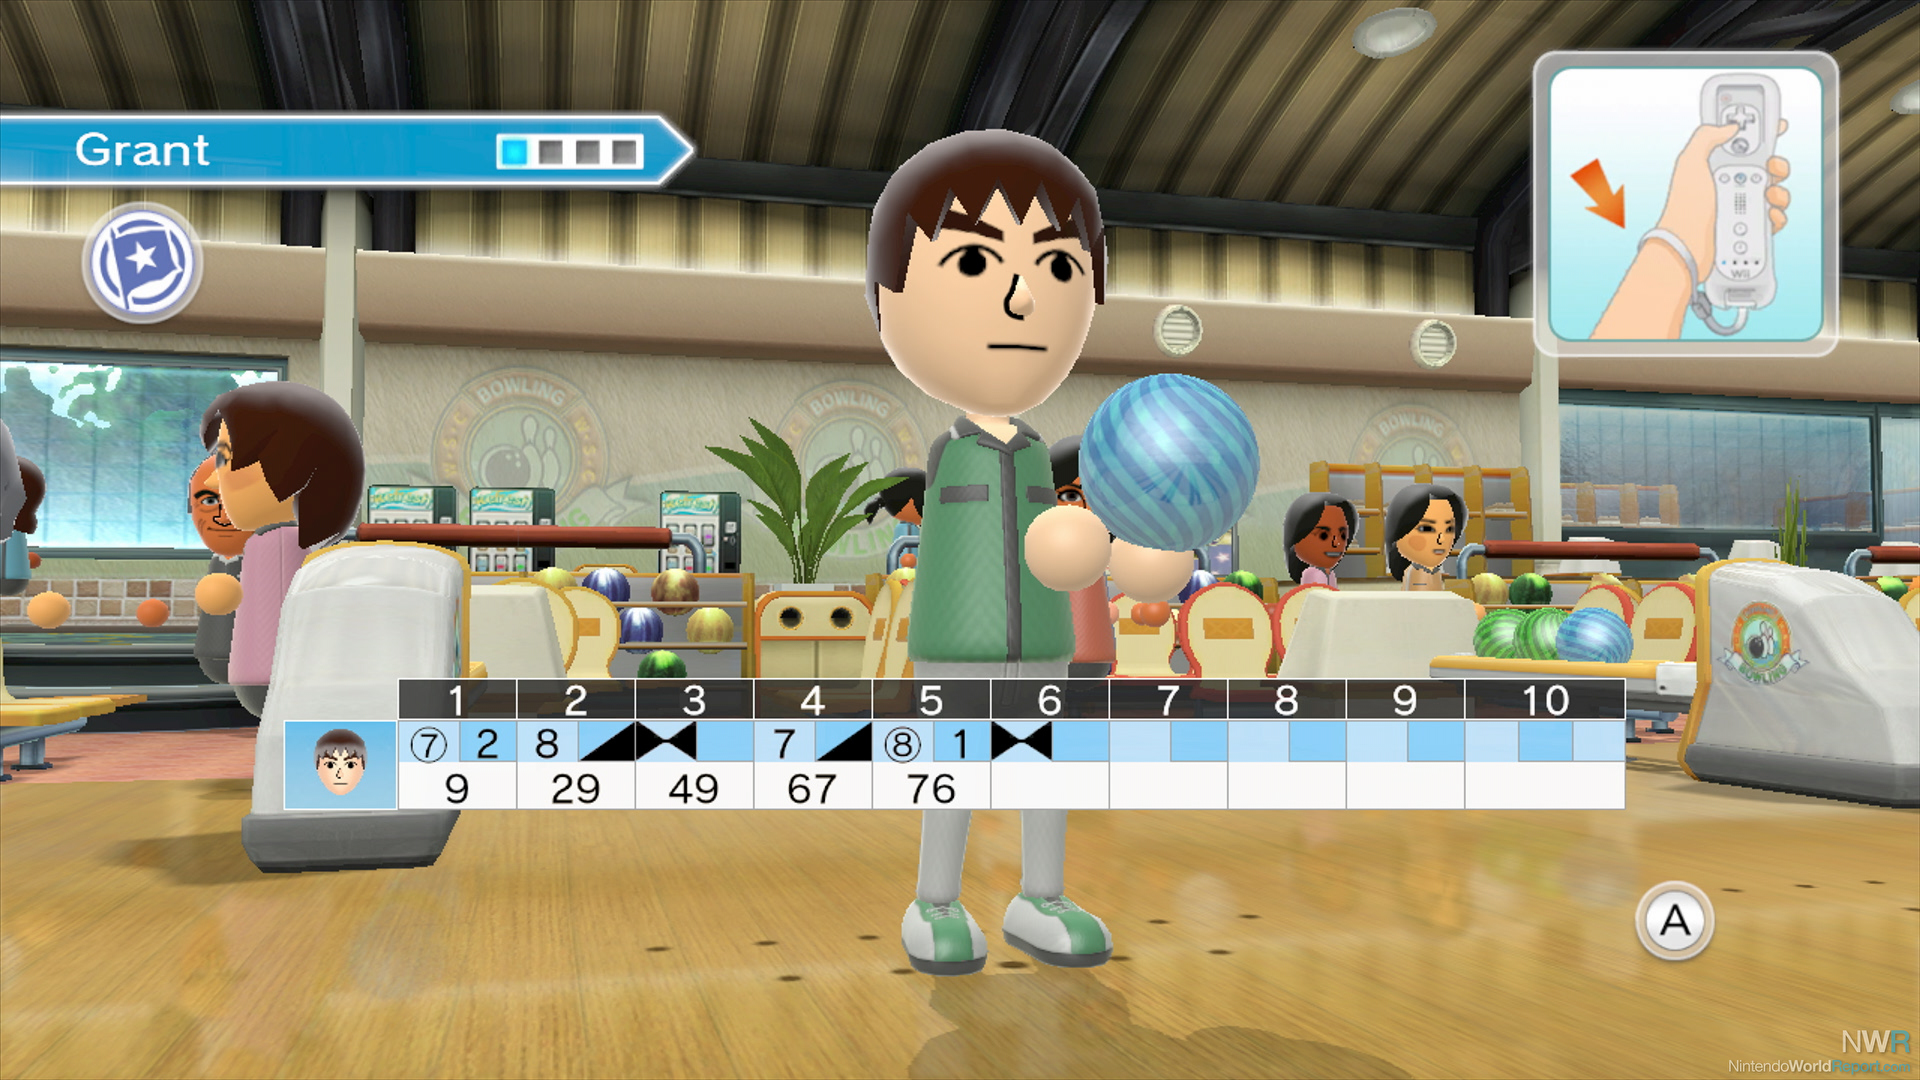 Wii Sports Club Bowling Review - Review